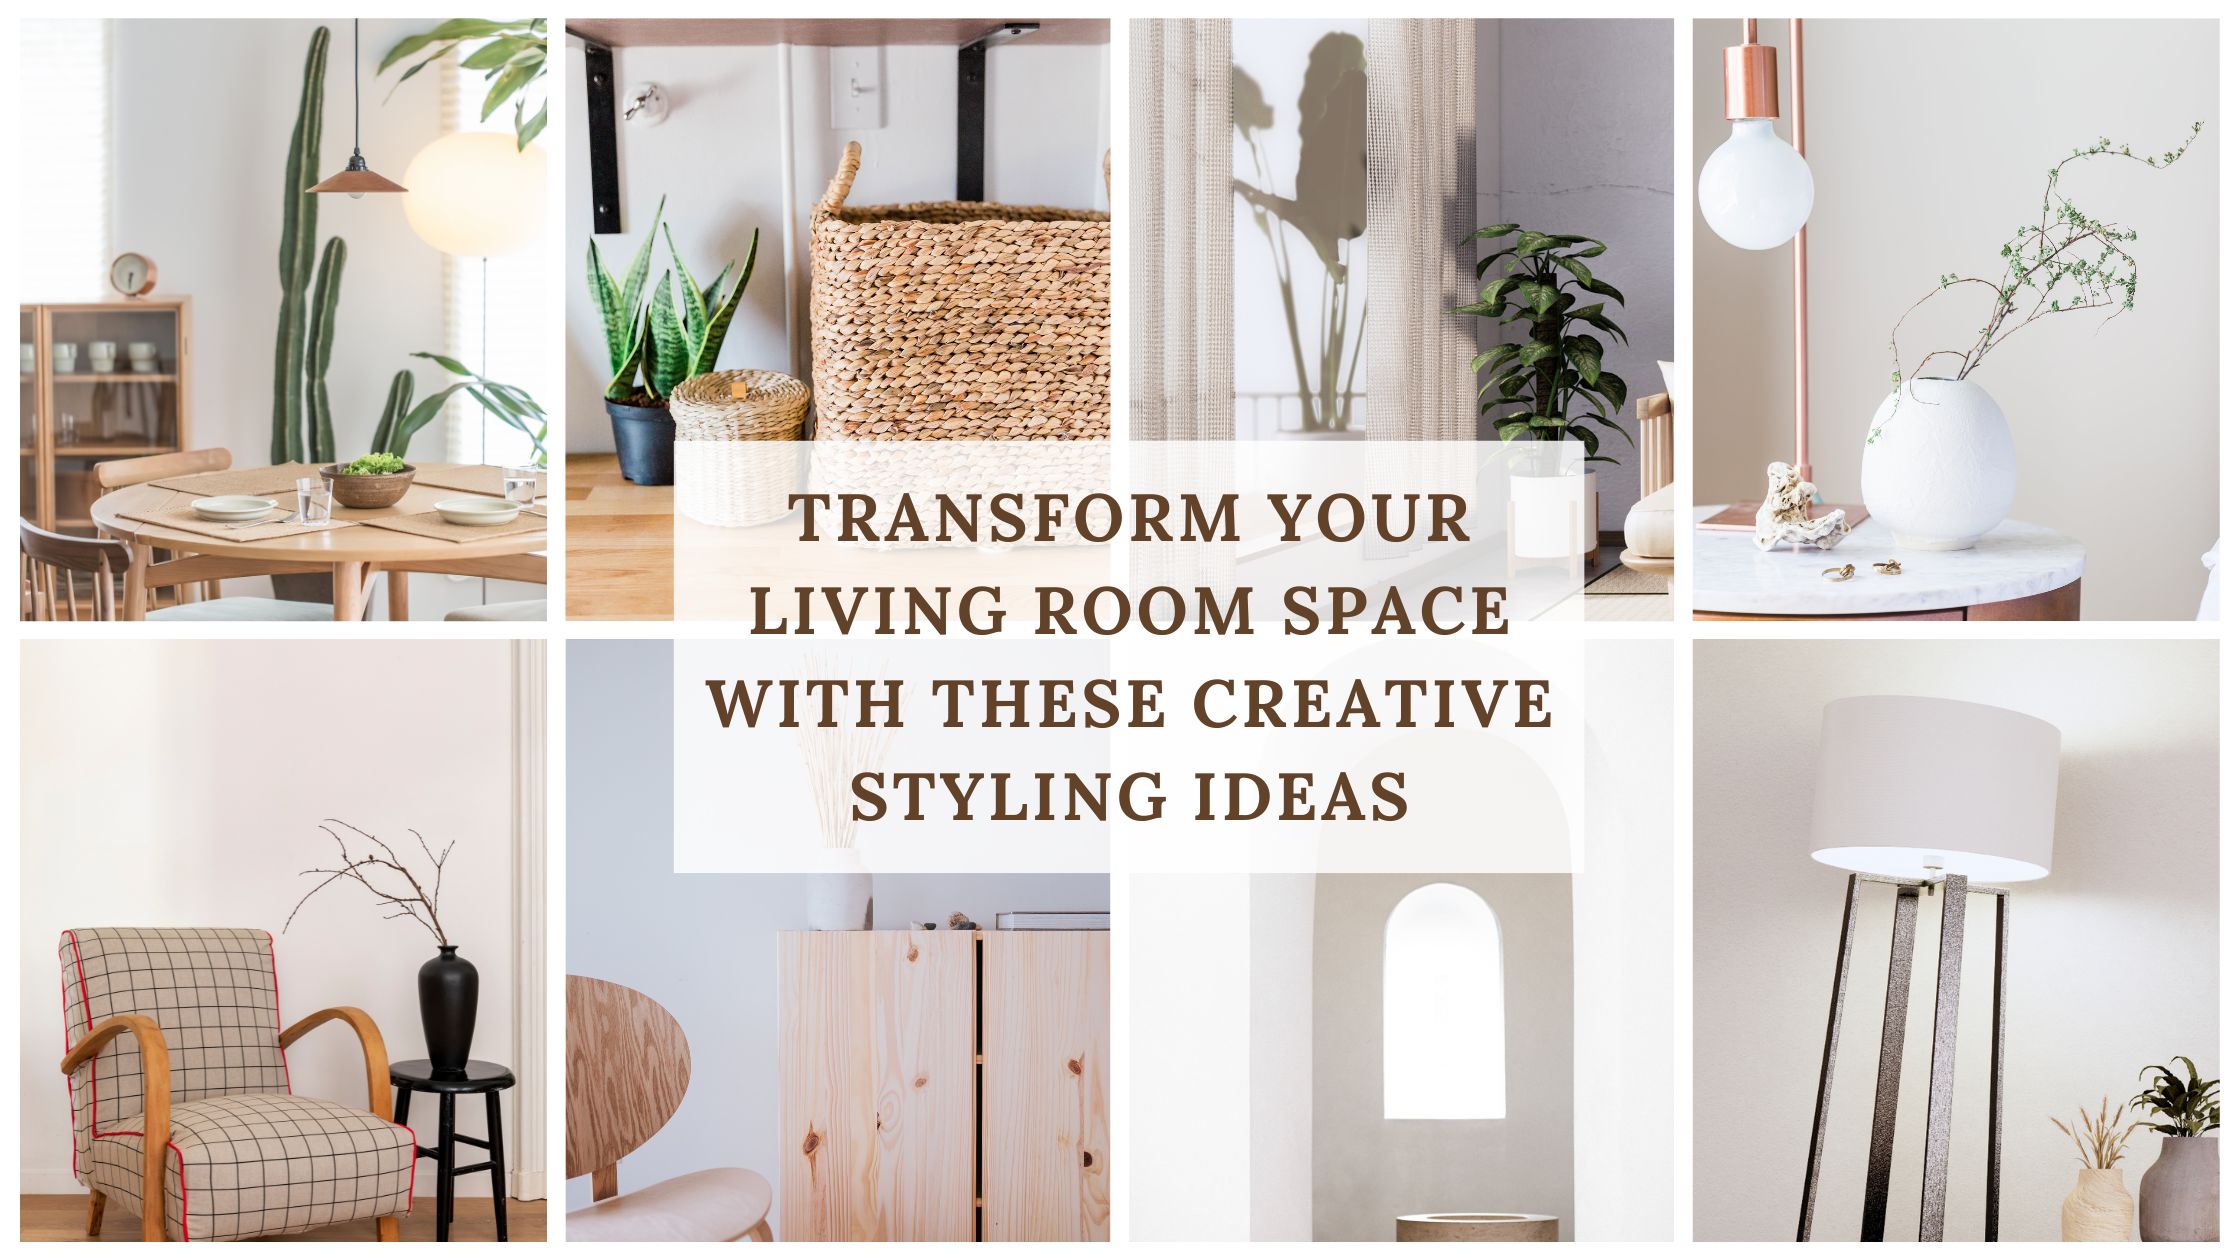 Transform your living room space with these creative styling ideas